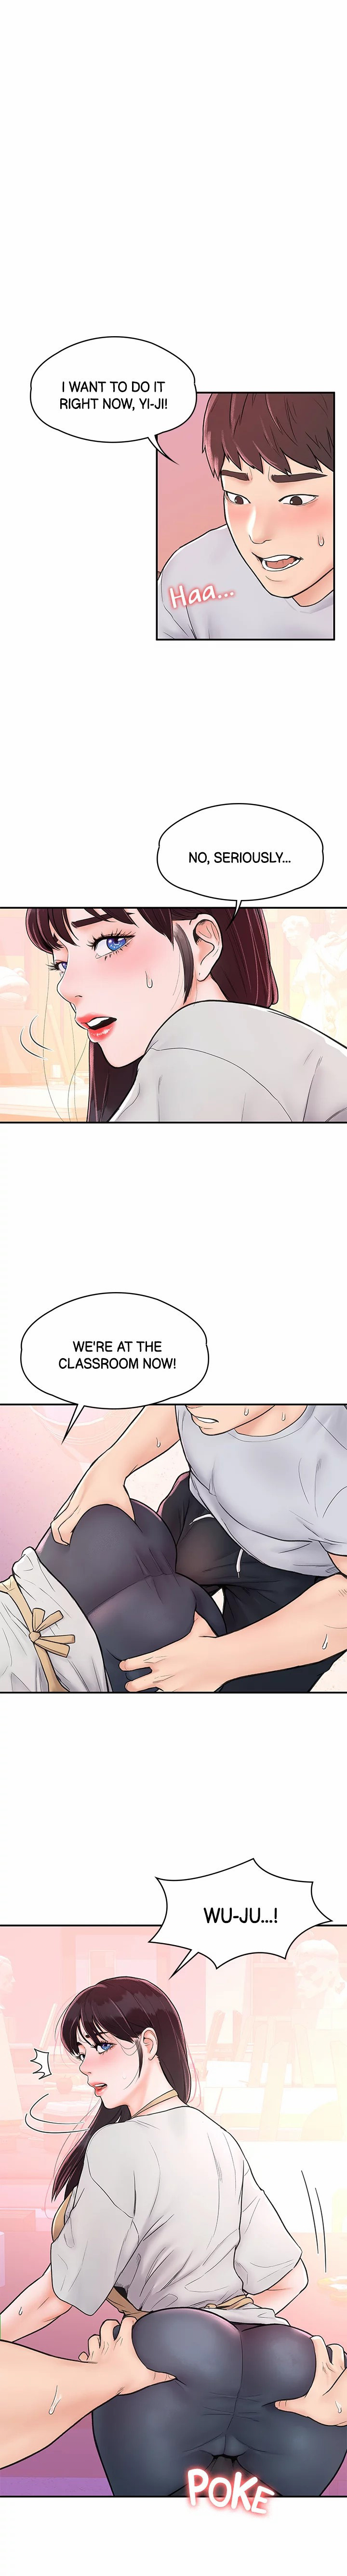 Campus Today - Chapter 14 Page 1